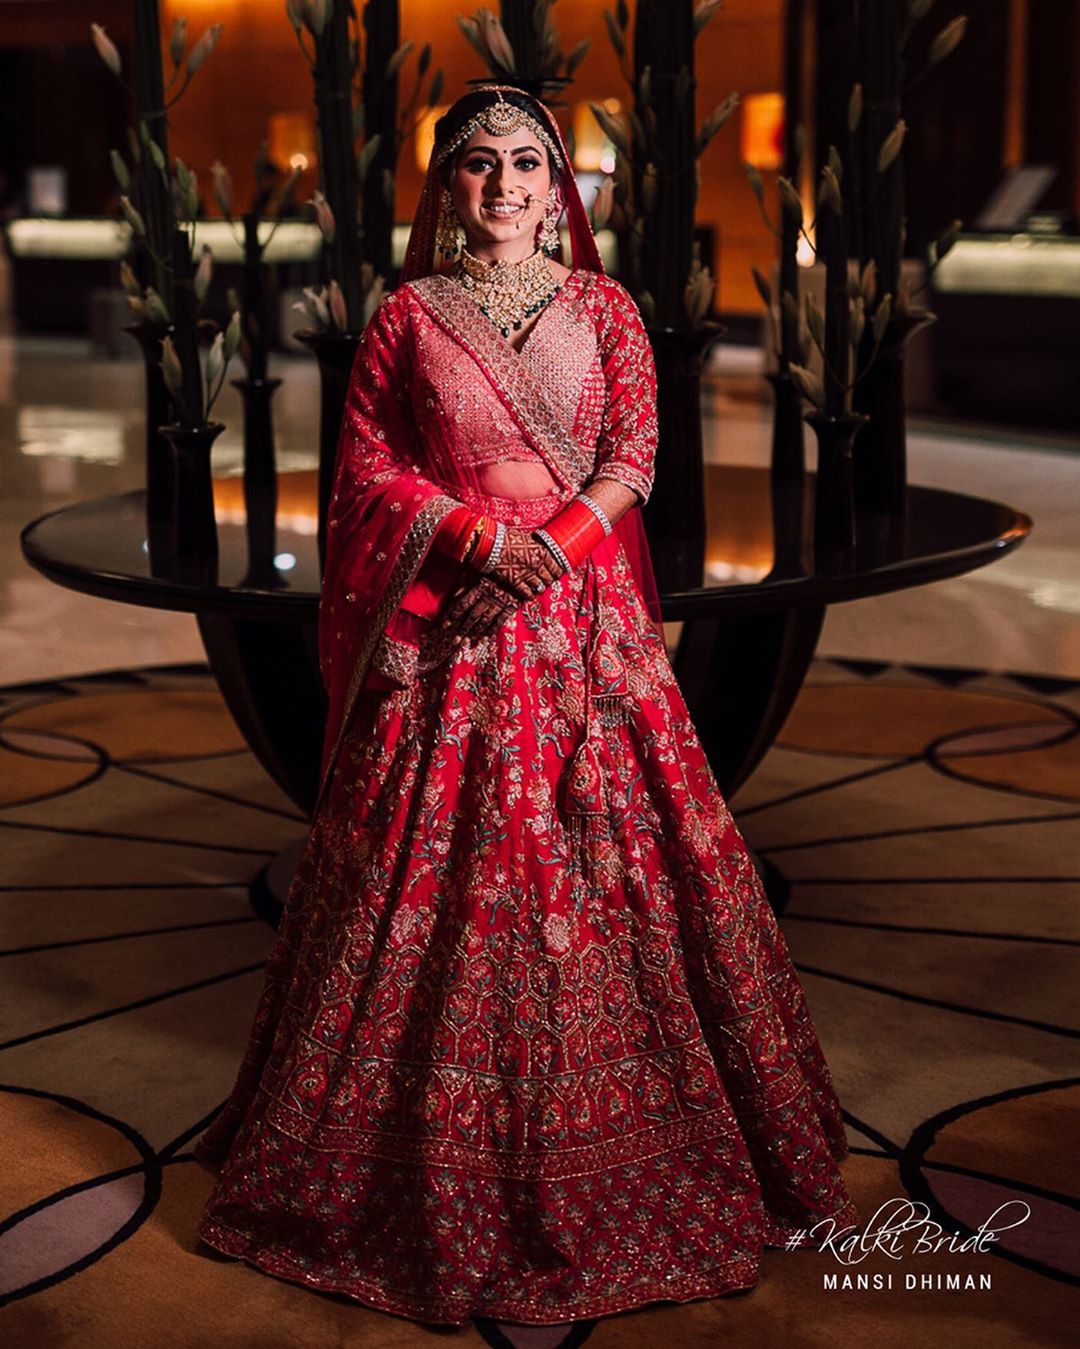 KALKI Fashion - KALKI bride Mansi channeled her inner goddess and wore the Athena Showstopper lehenga for her wedding and let us tell you, she looked gorgeous!💕
.
The moment I saw this Lehenga I fell...